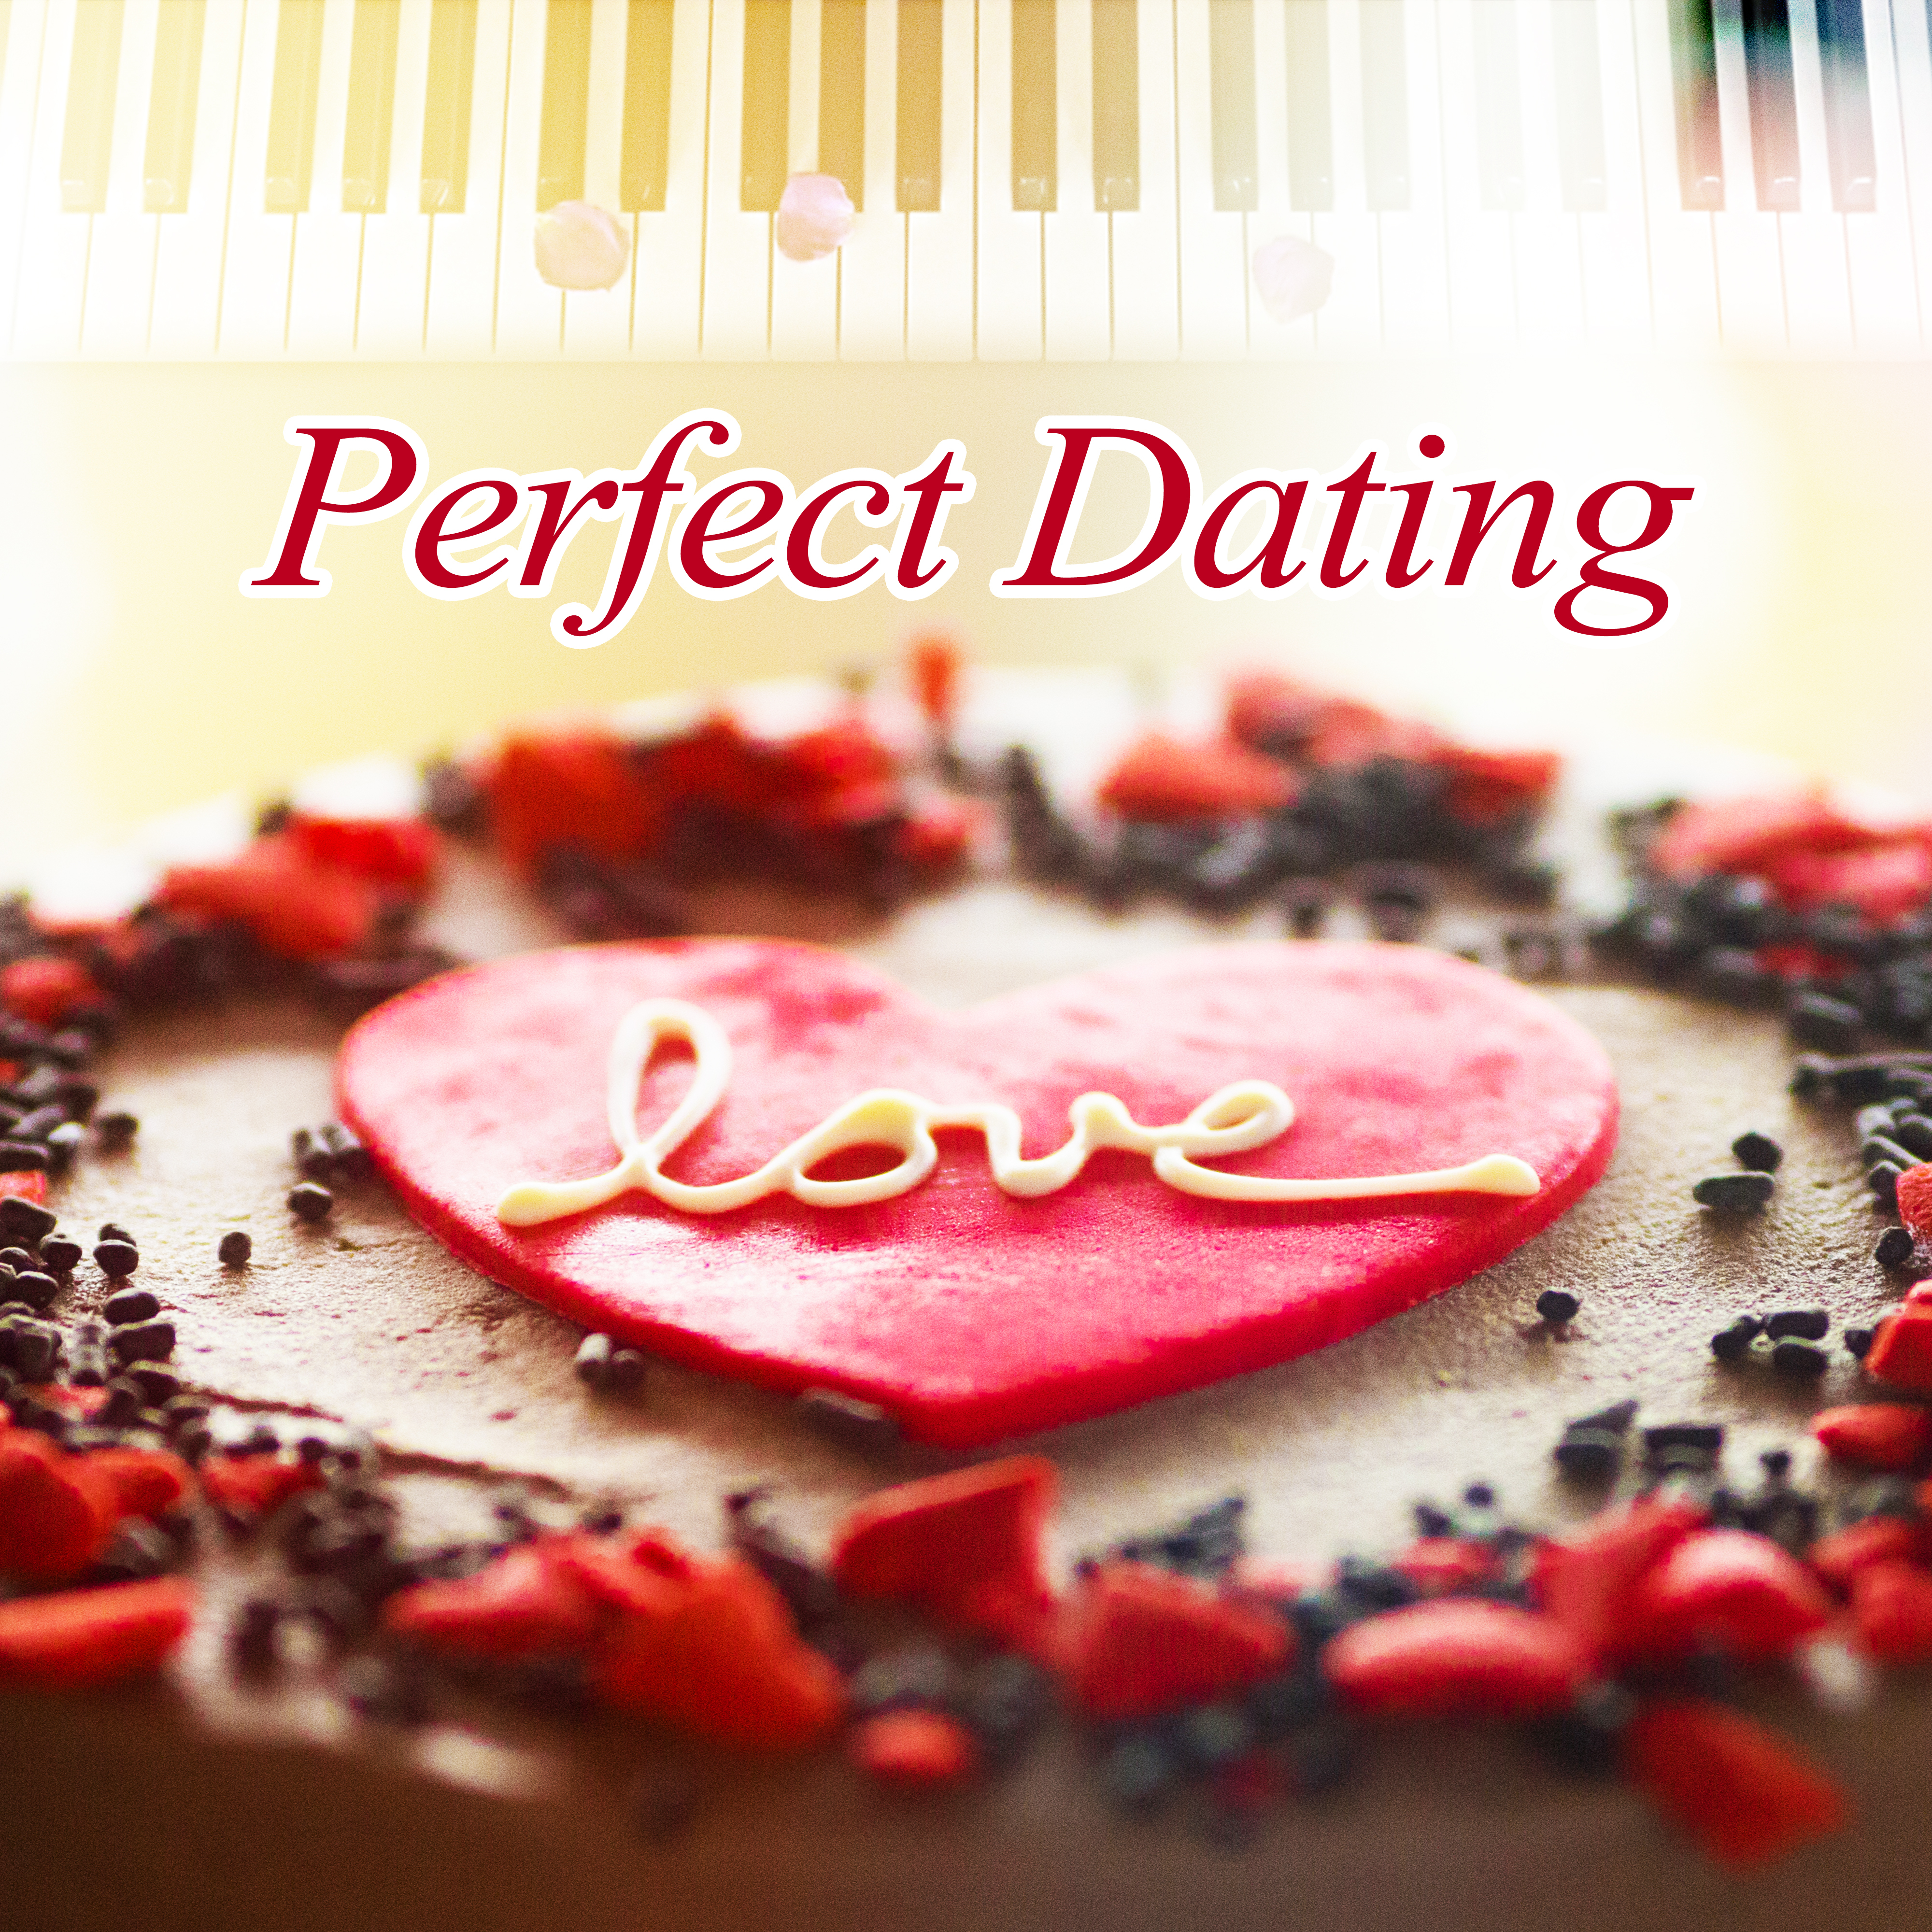 Perfect Dating - Beautiful Music, Wonderful Table, Bottle of Wine, Flowers, Glances and Kisses